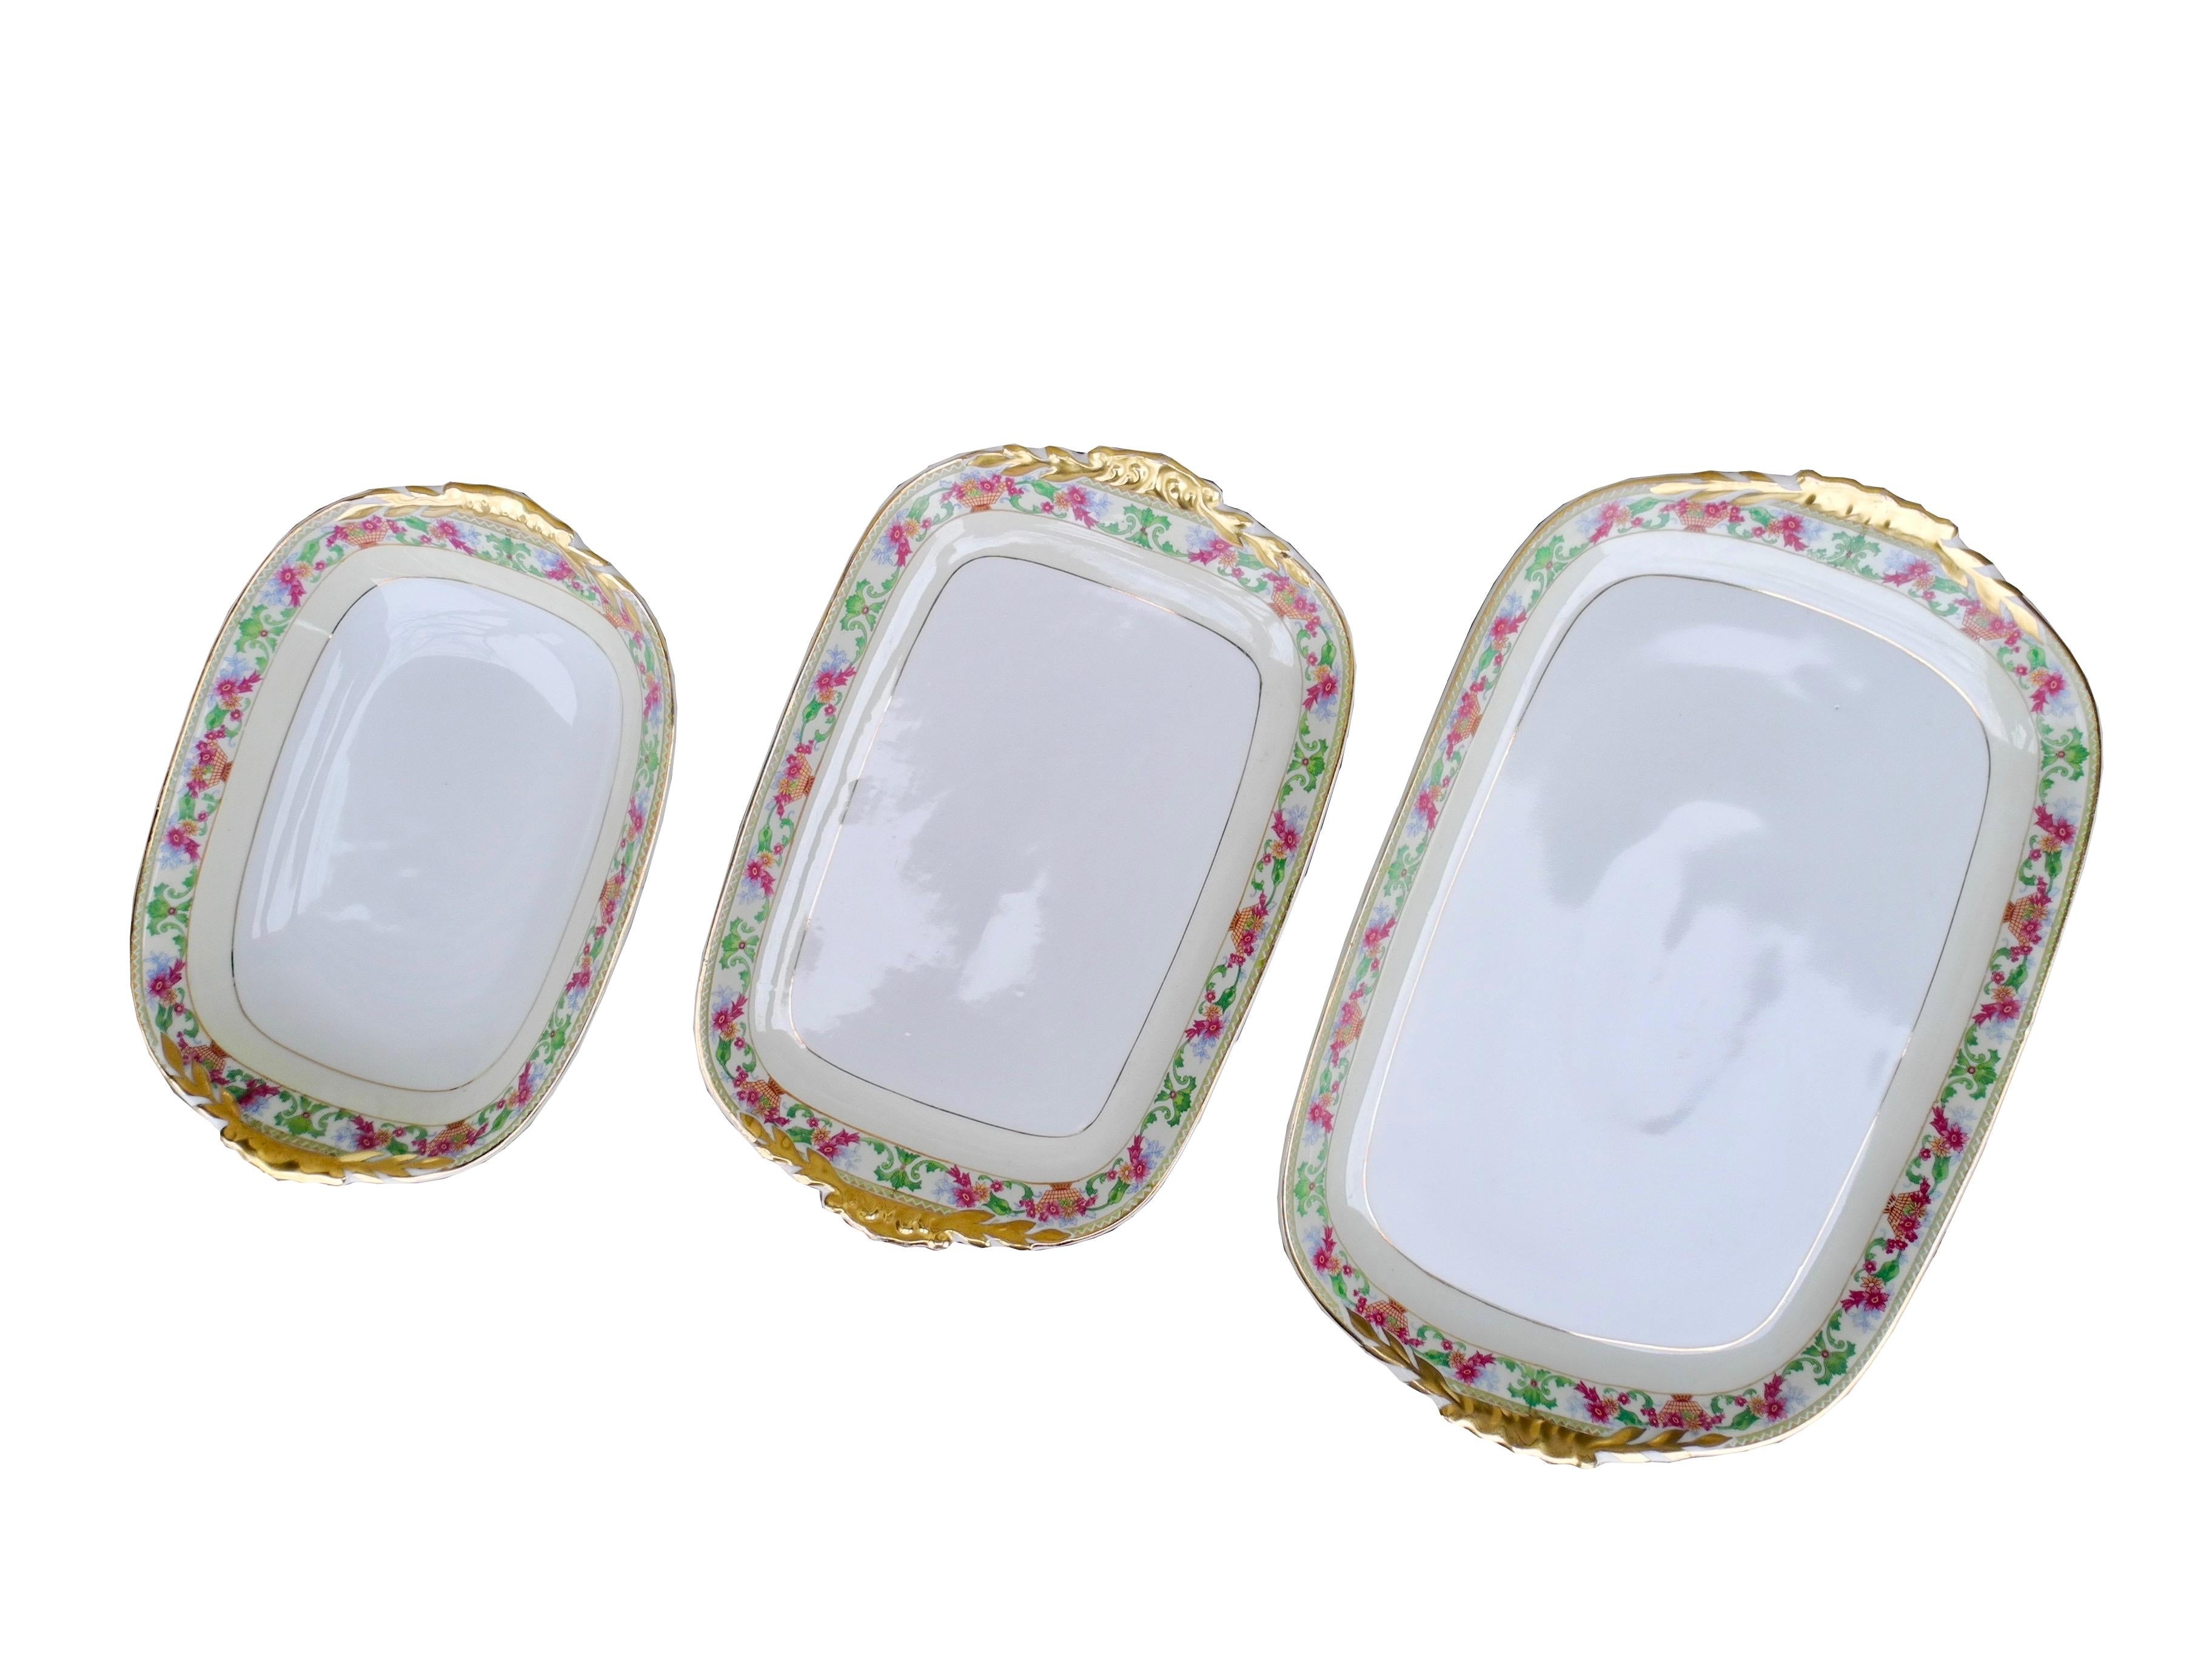 Rococo Revival Set of 3 Porcelain Transfer Print Serving Platters made in Czechoslovakia For Sale